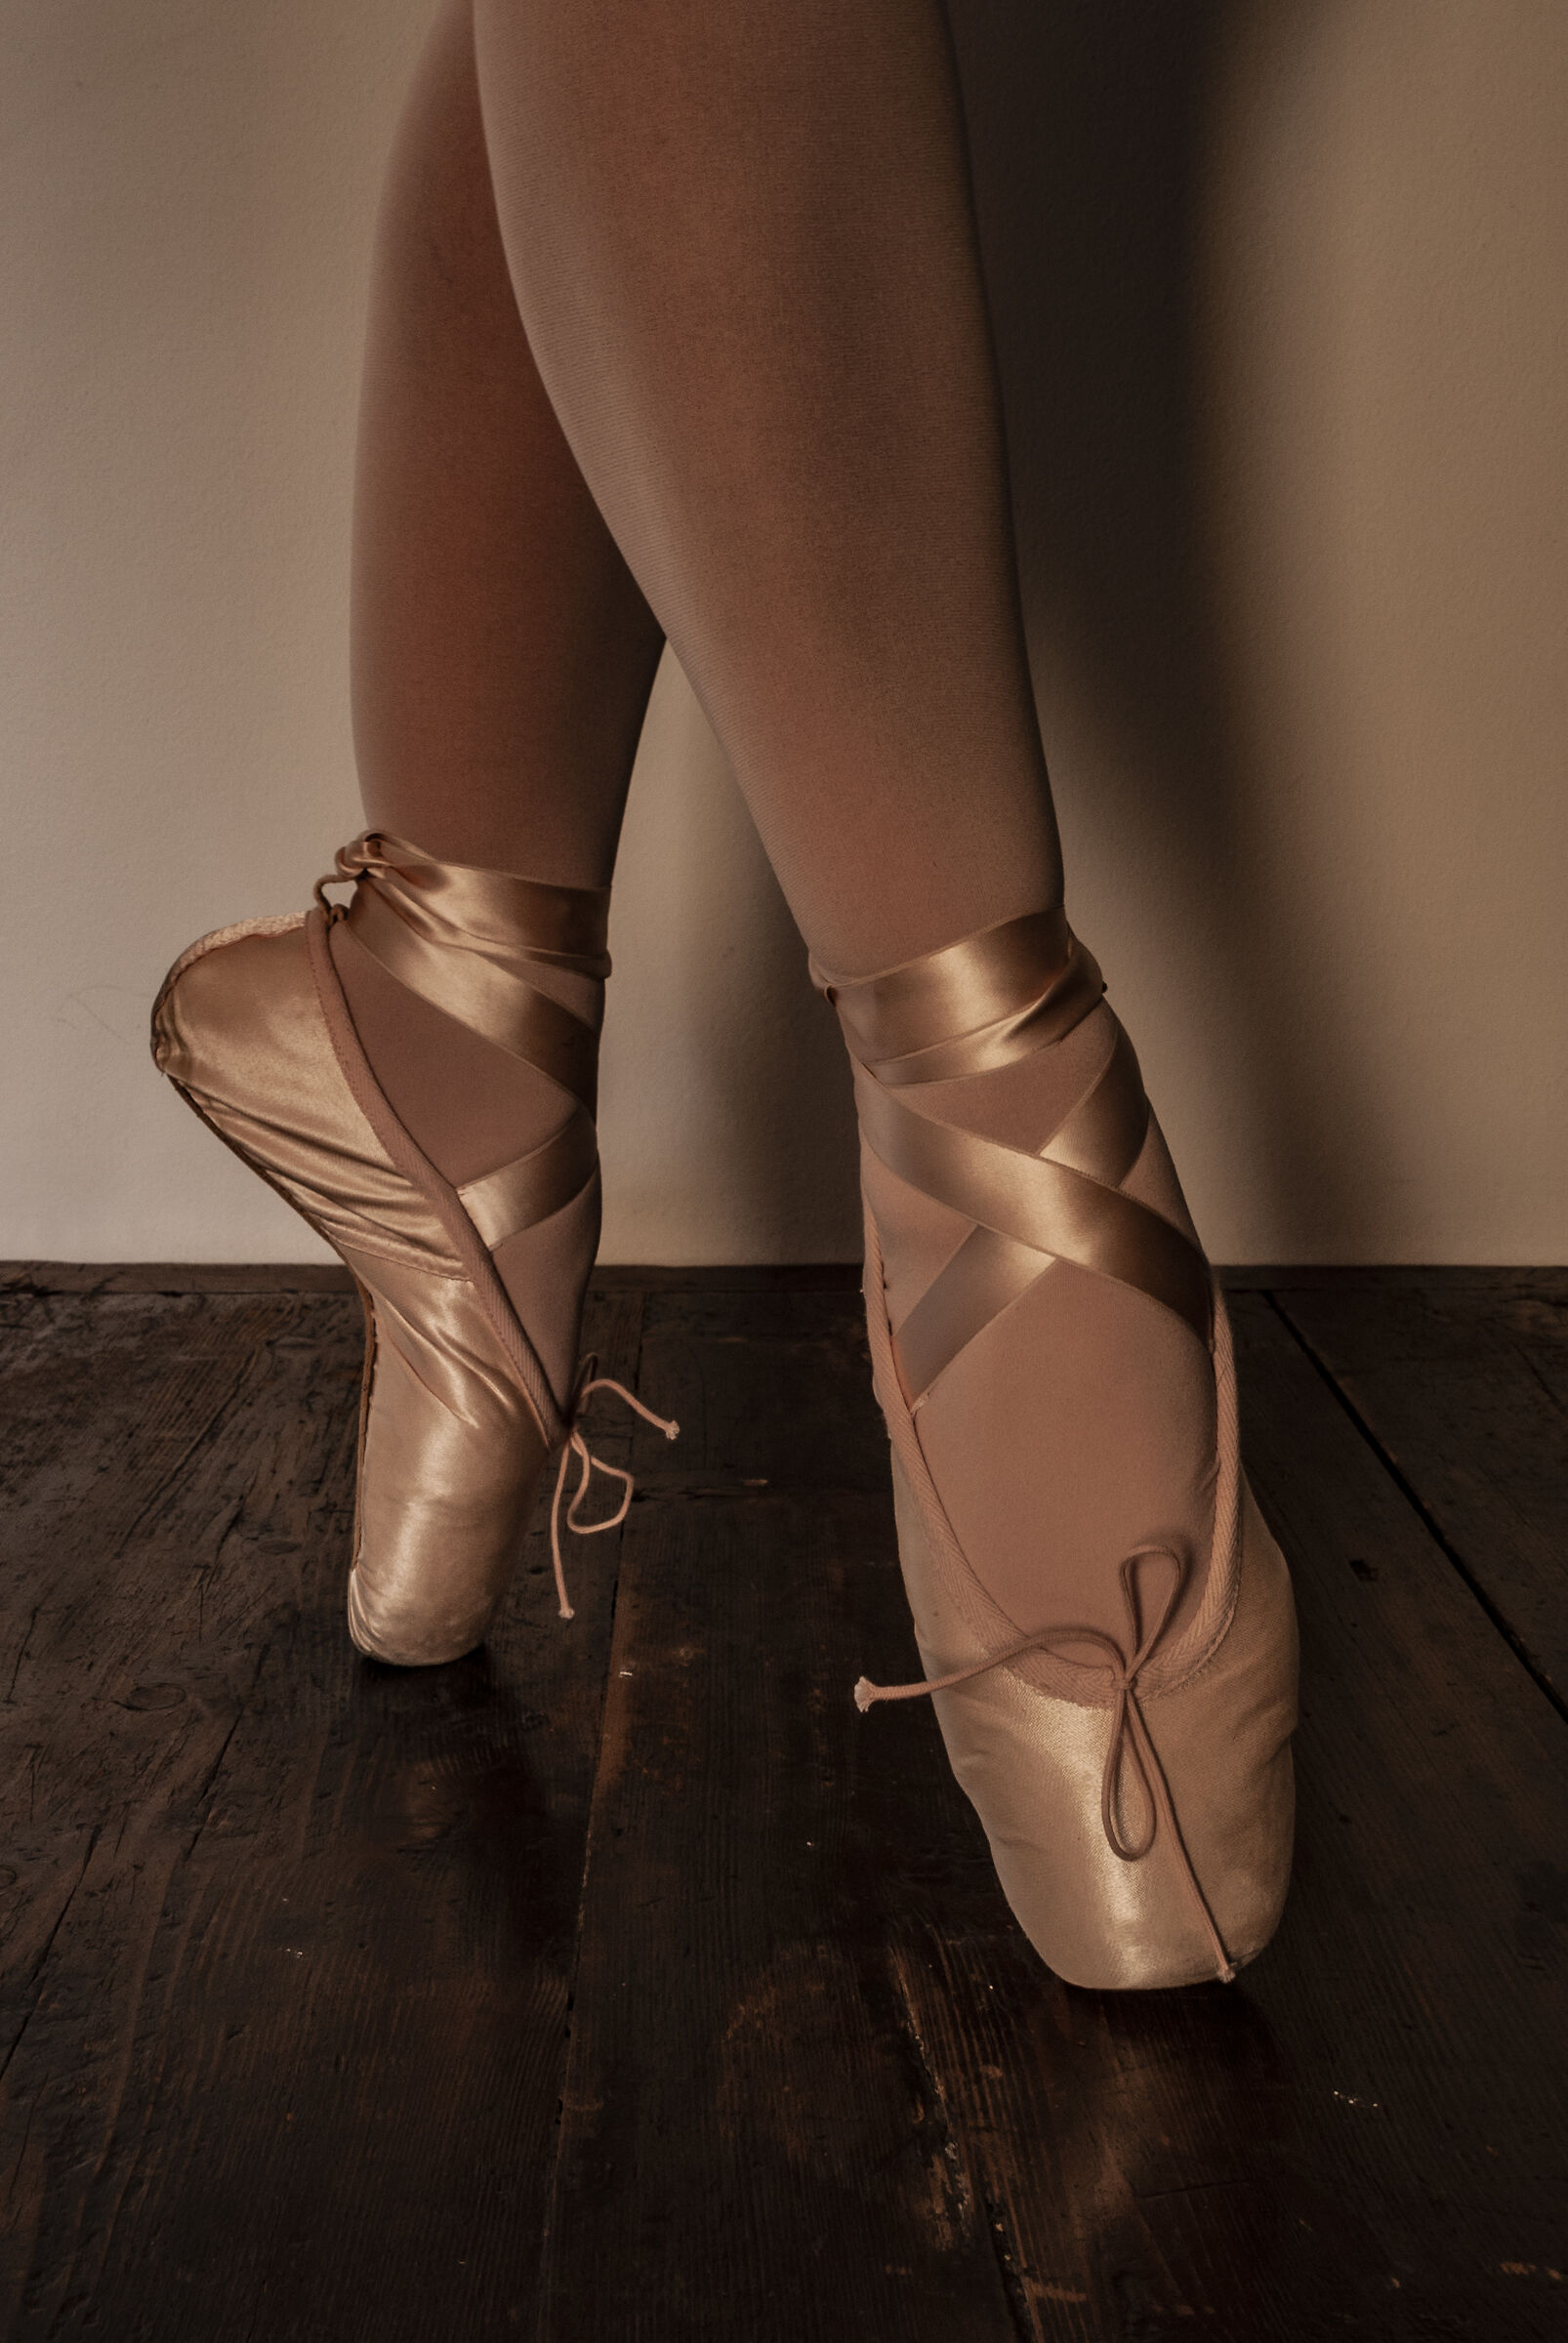 pointe shoes in use...